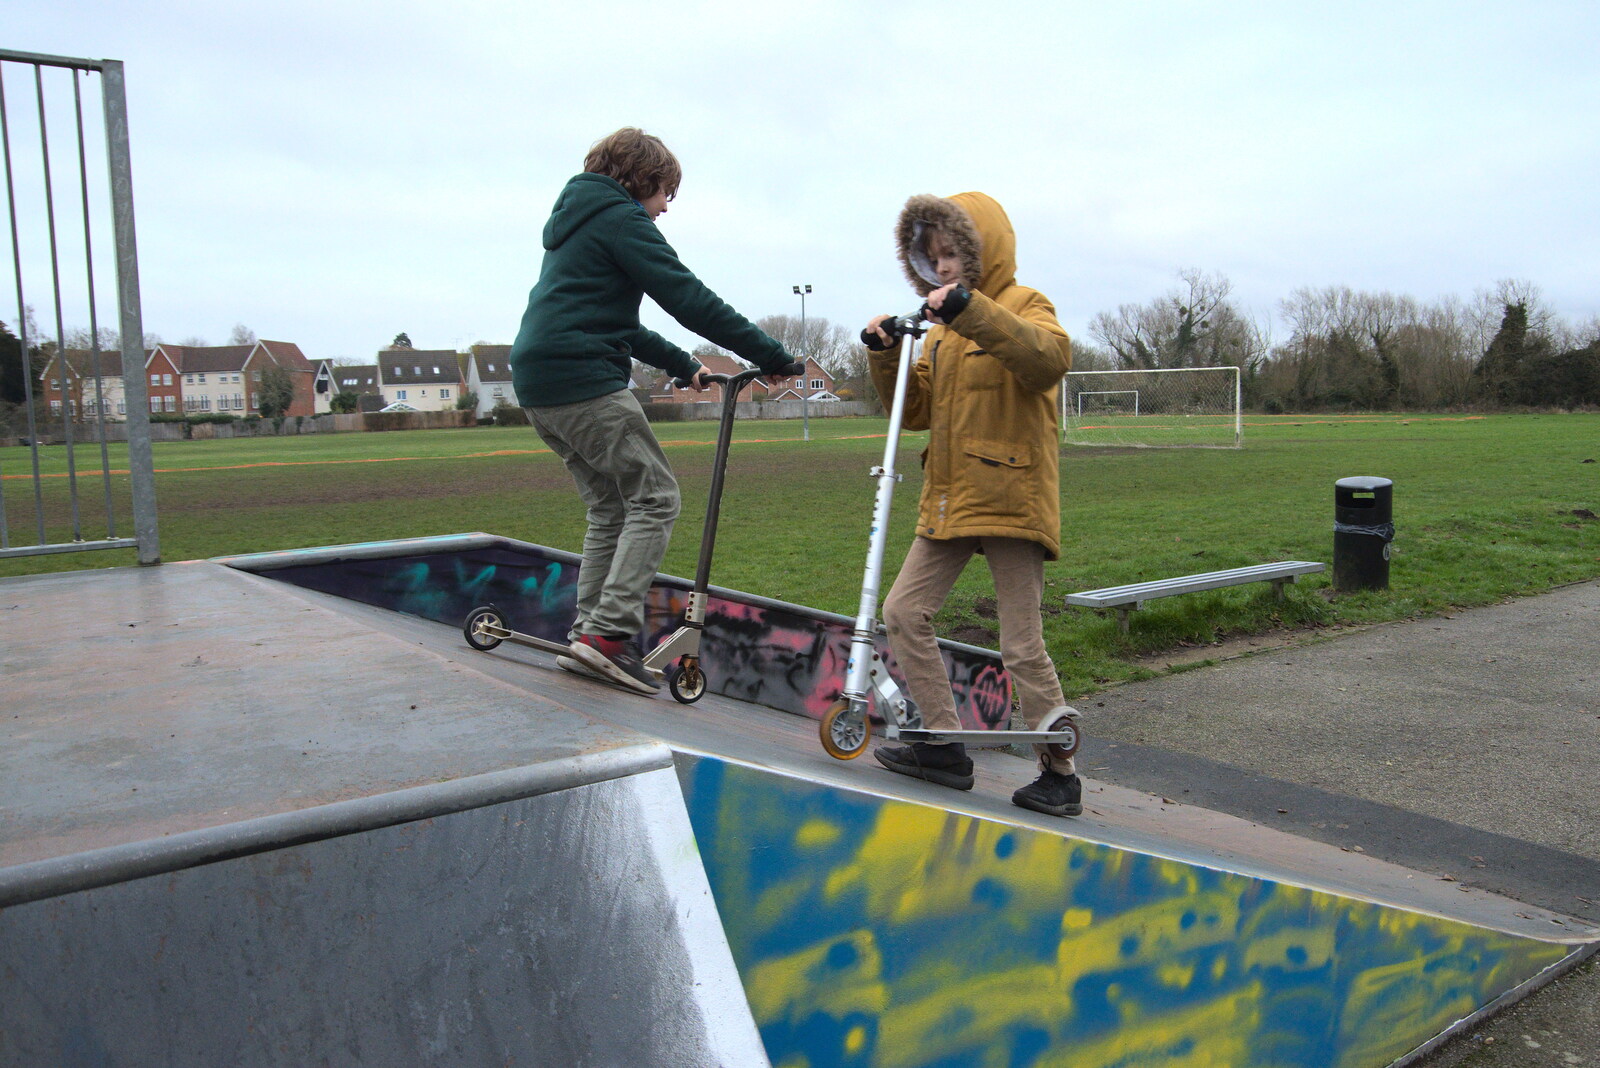 Fred and Harry on the ramps in Eye from Scooters and a Bit of Christmas Shopping, Eye and Norwich, Norfolk - 23rd December 2021